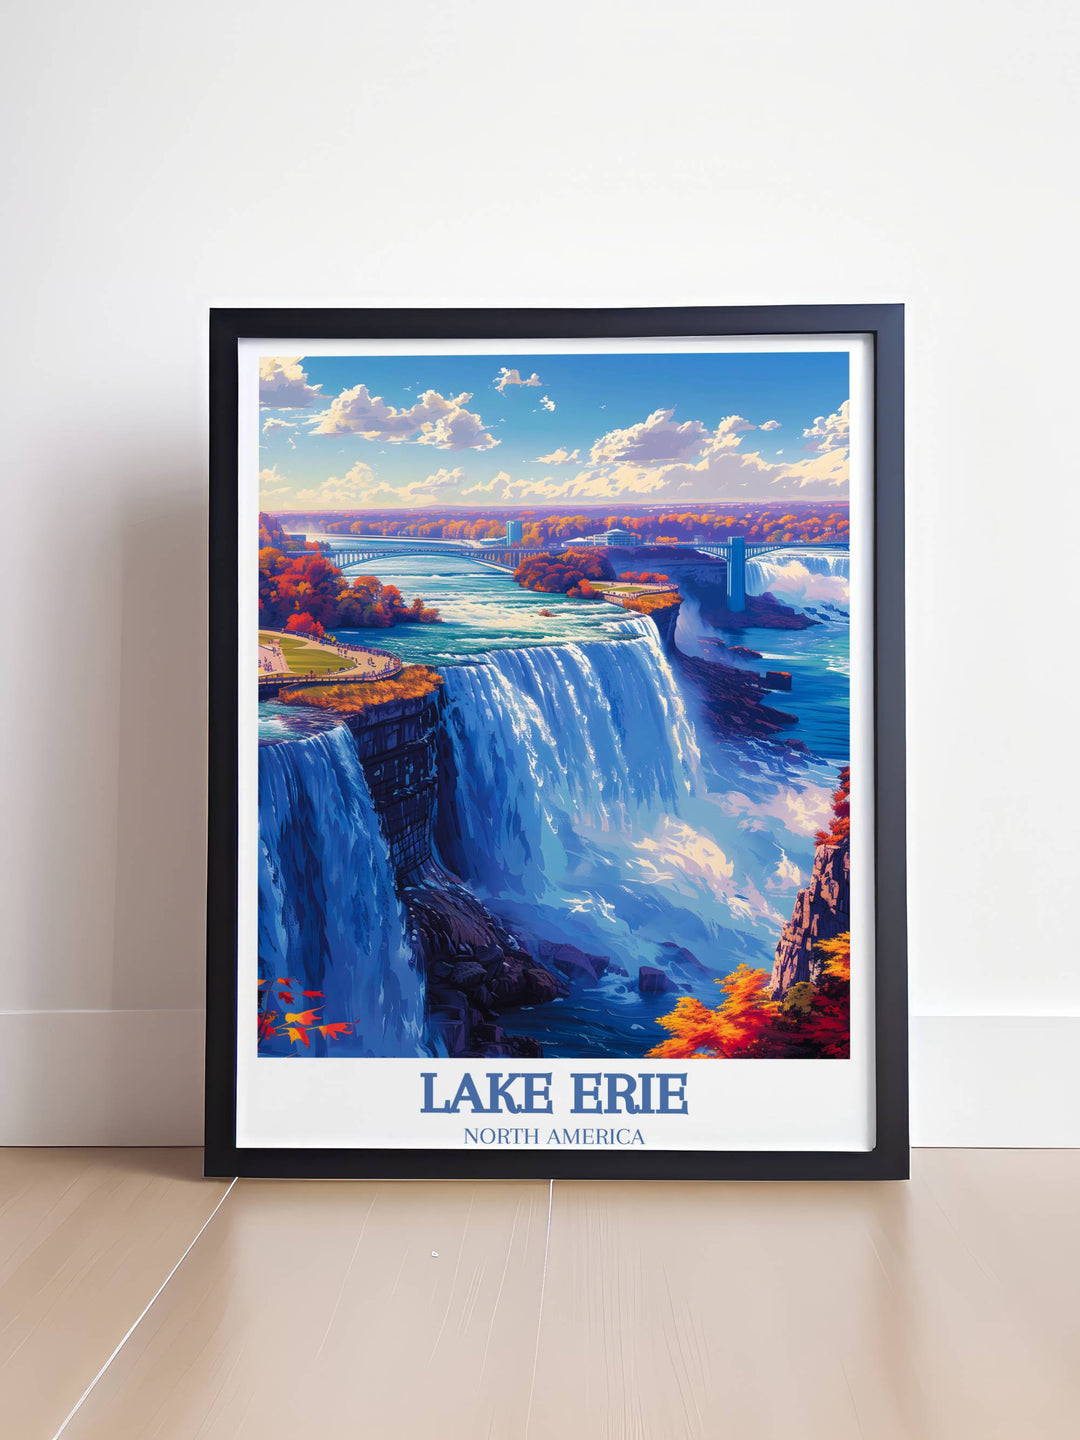 Framed art of Lake Eries peaceful waters, ideal for adding a tranquil element to modern or traditional decor styles.